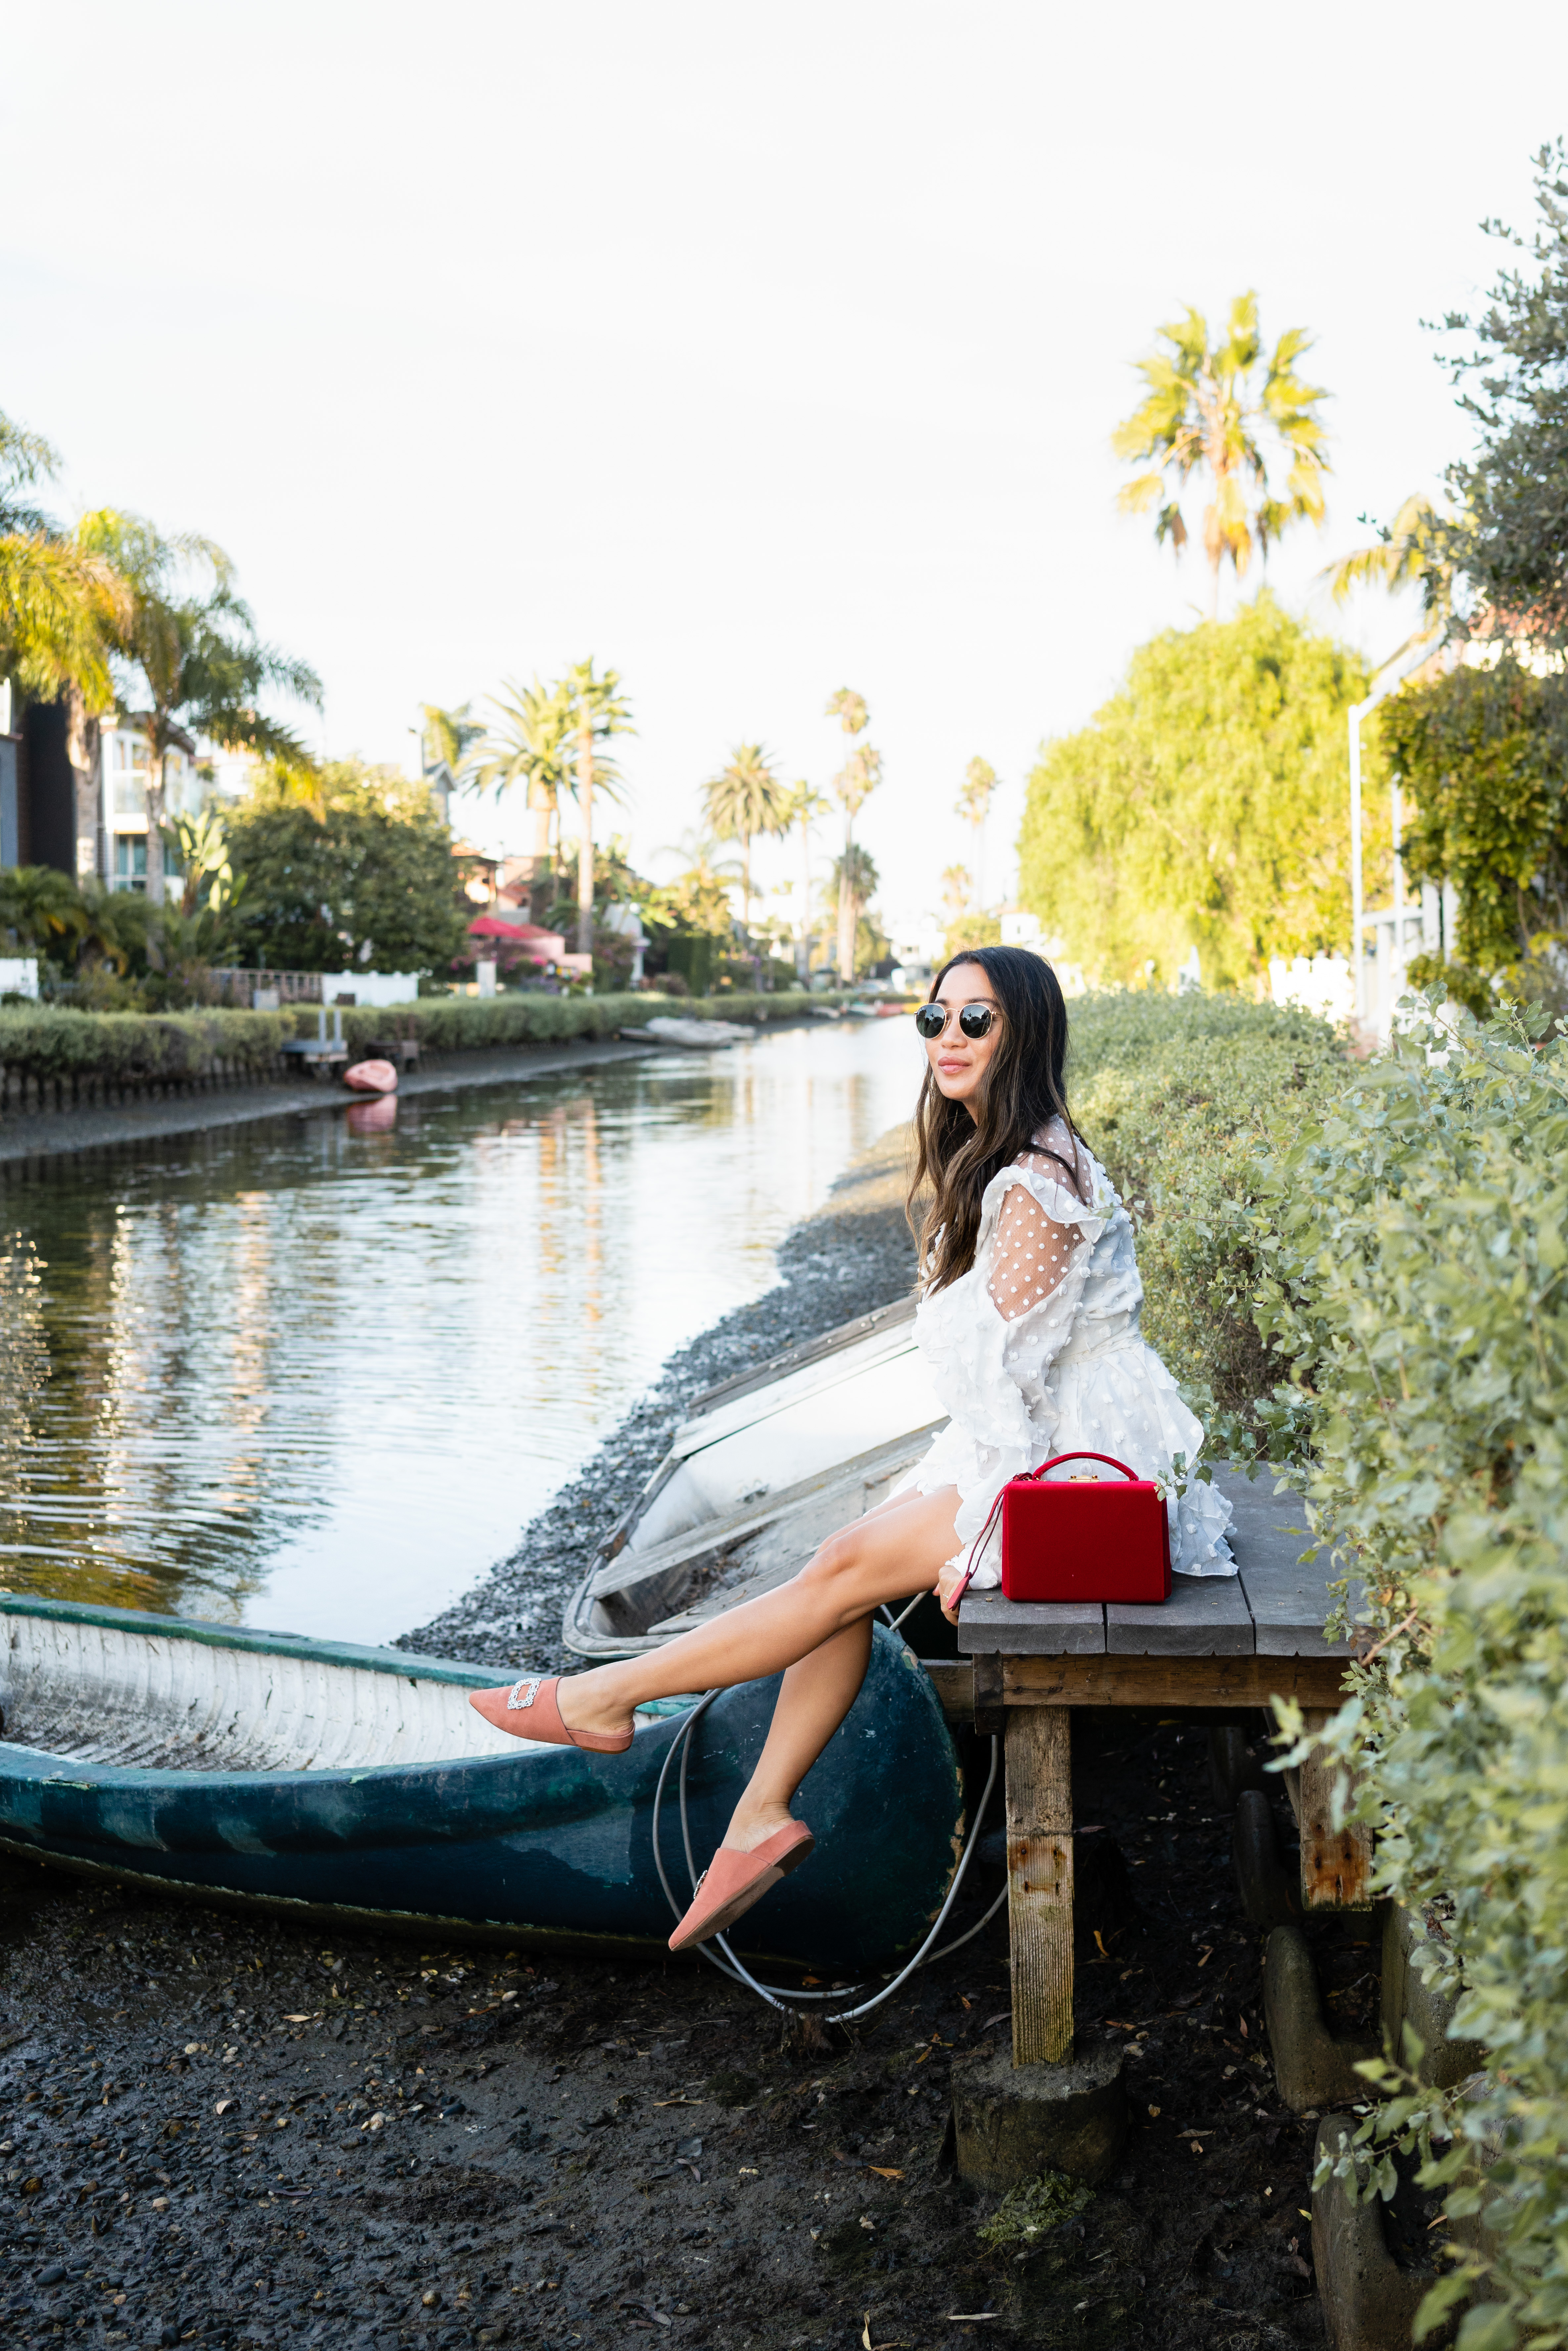 Venice Canals at Venice Beach wearing white polka dot romper and Stuart Weitzman mules and Mark Cross grace bag